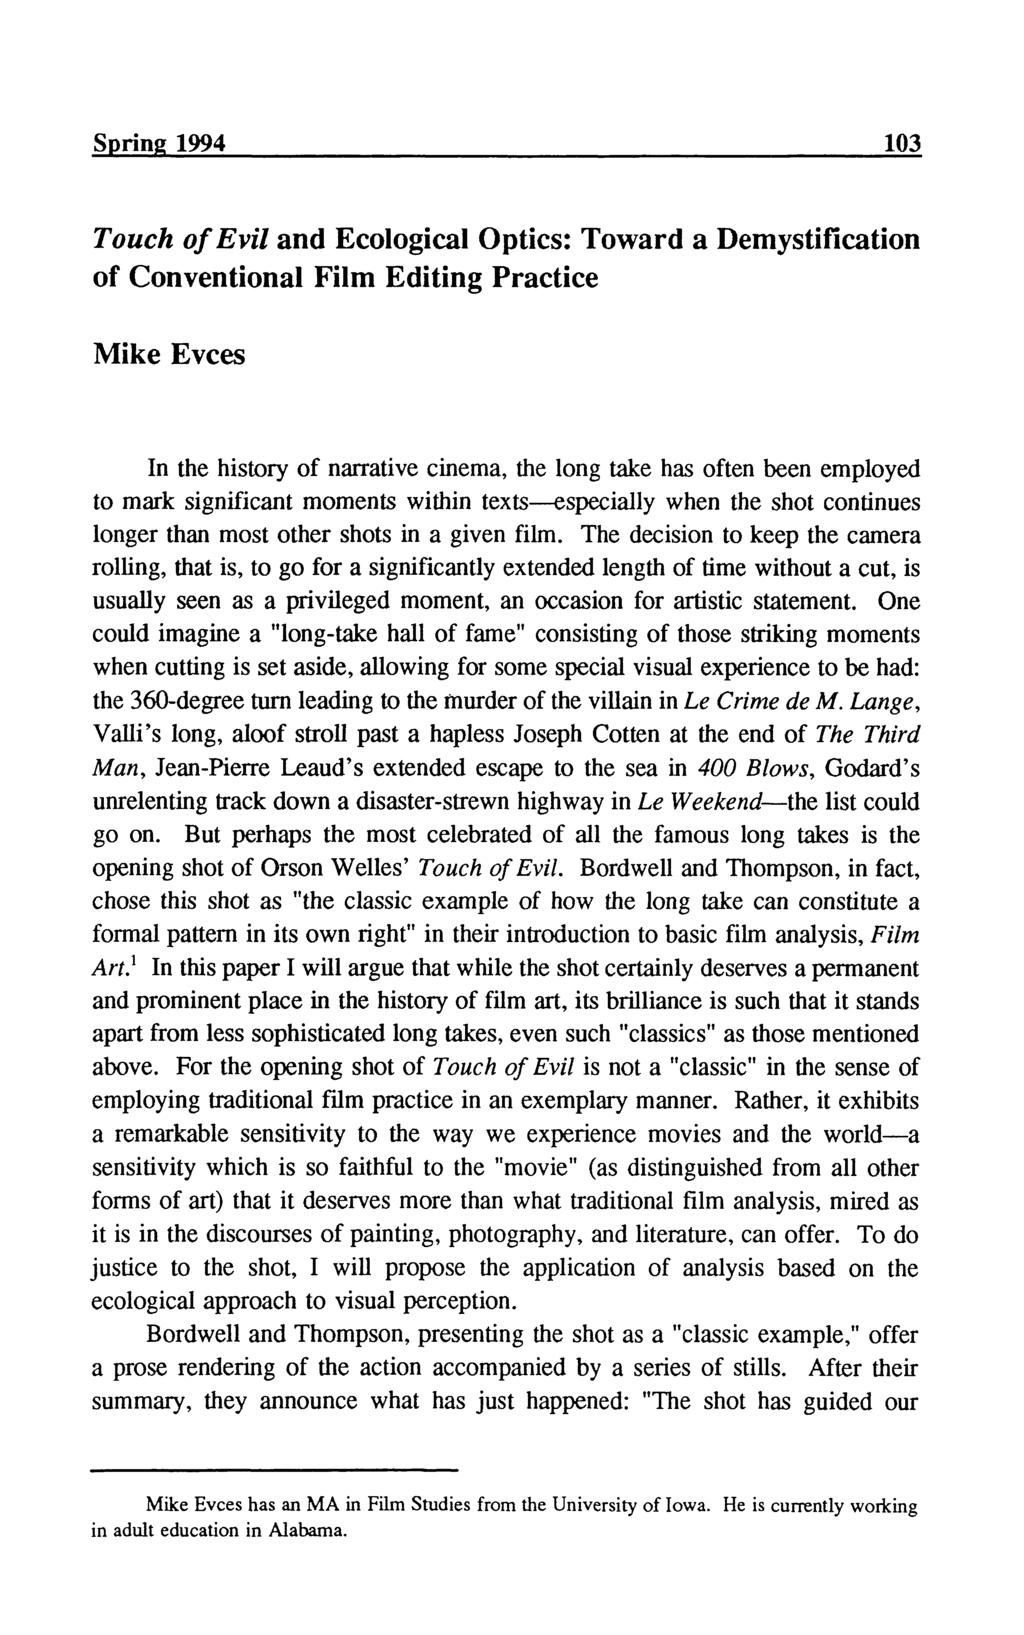 Spring 1994 103 Touch of Evil and Ecological Optics: Toward a Démystification of Conventional Film Editing Practice Mike Evces In the history of narrative cinema, the long take has often been